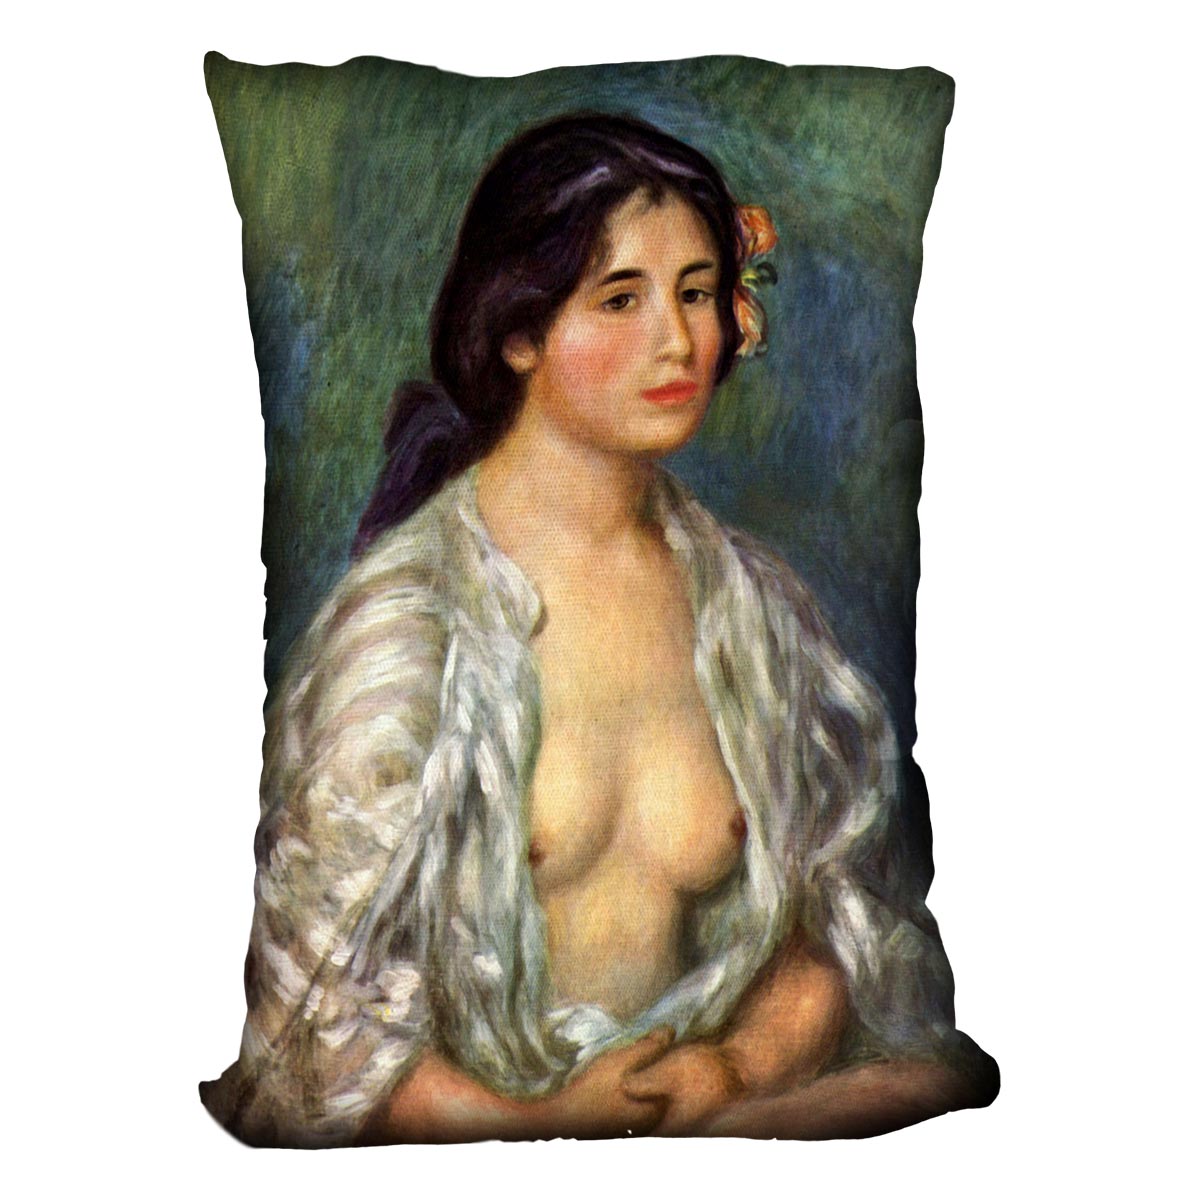 Gabrielle with open blouse by Renoir Cushion